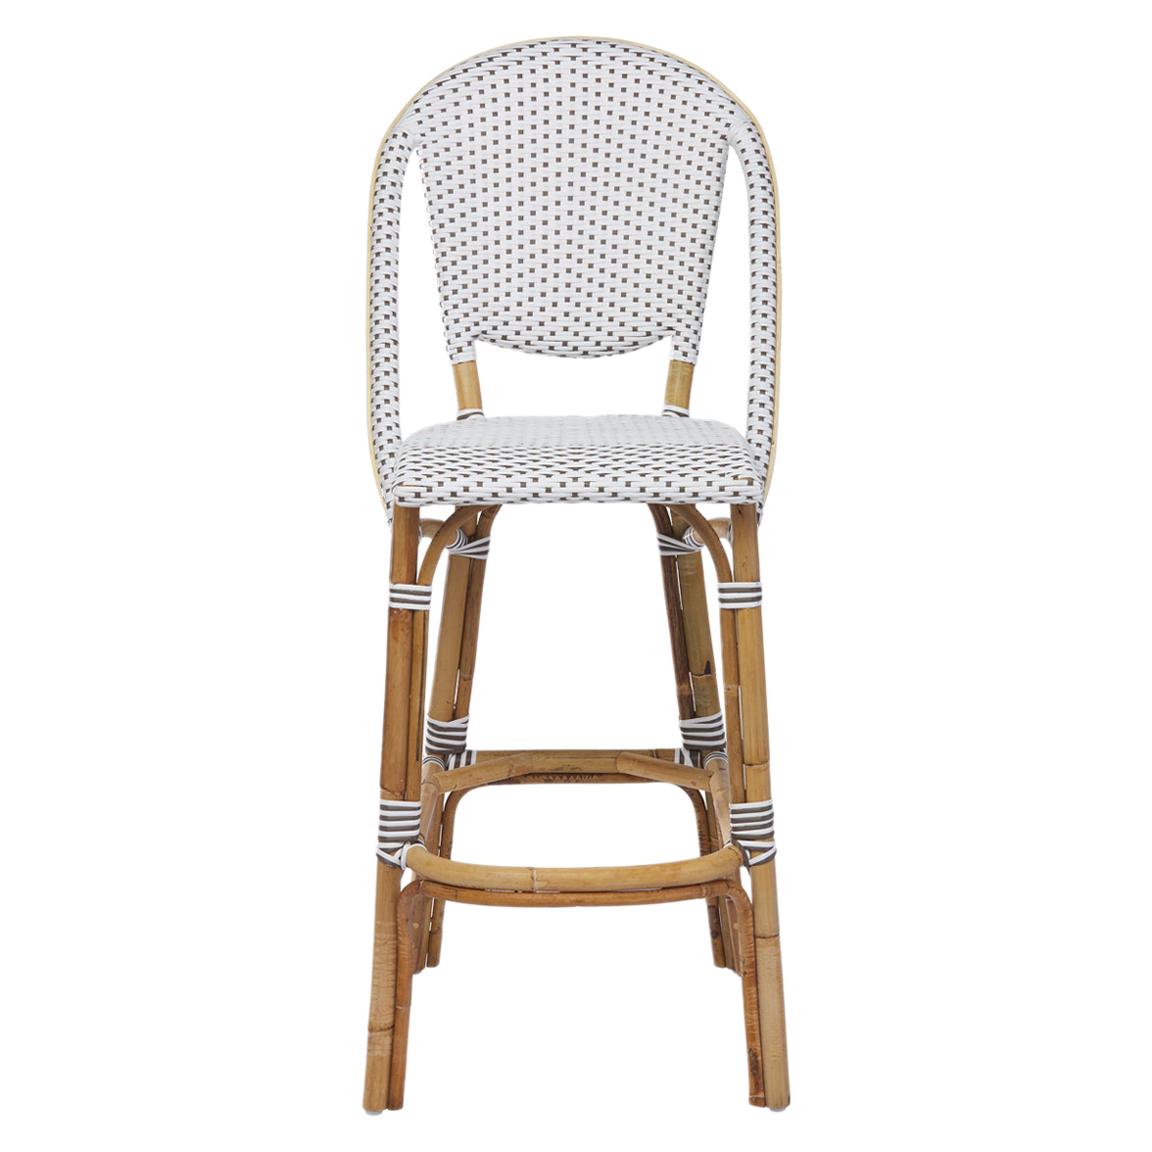 Sika Design Sofie Woven Rattan Bistro Bar Stool in White with Cappuccino Dots